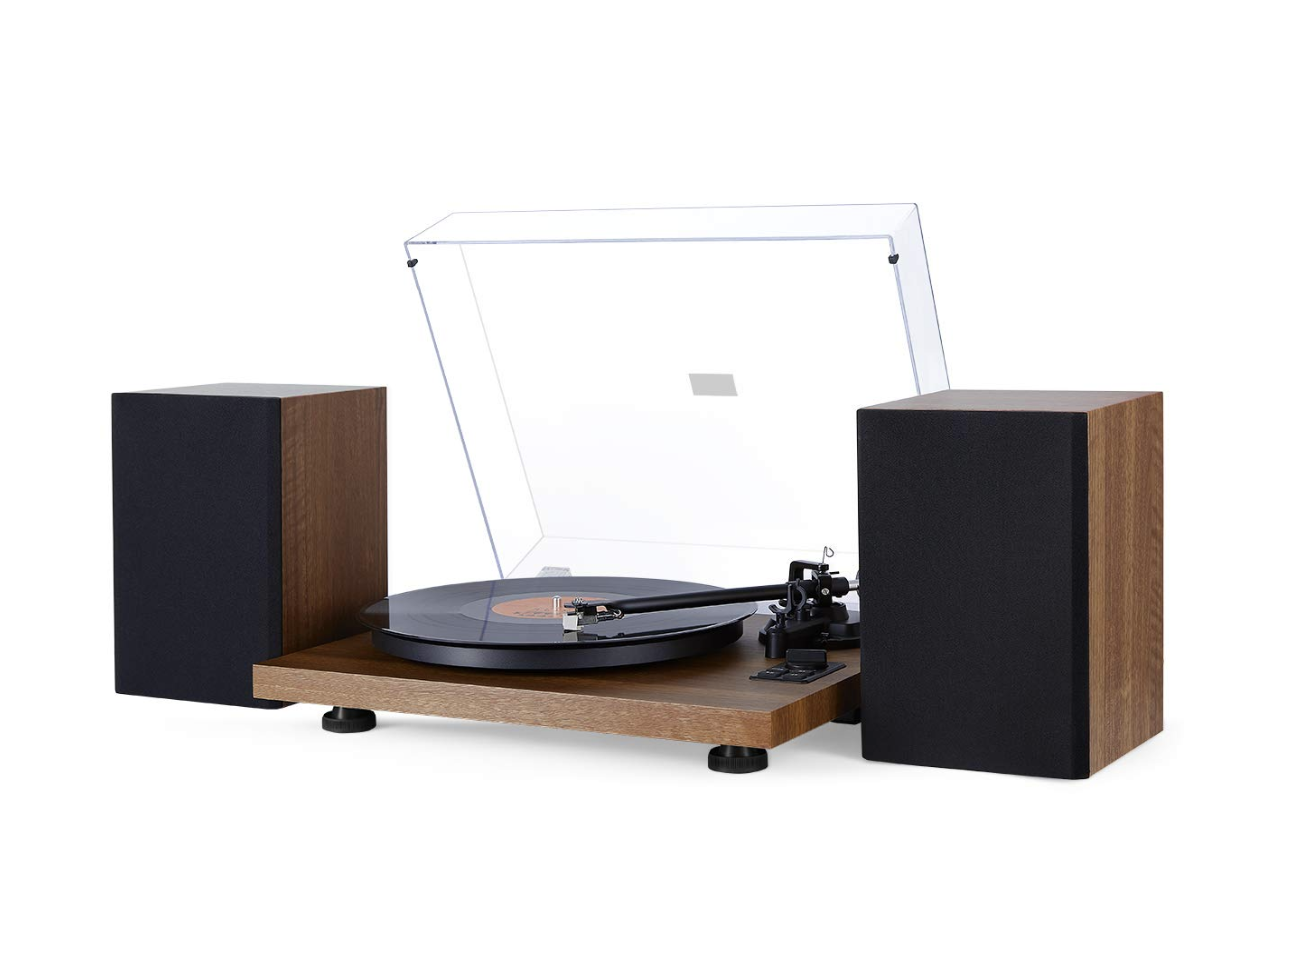 1byone Wireless Turntable Hi-Fi System with 36 Watt Bookshelf Speakers, Vinyl Record Player with Magnetic Cartridge